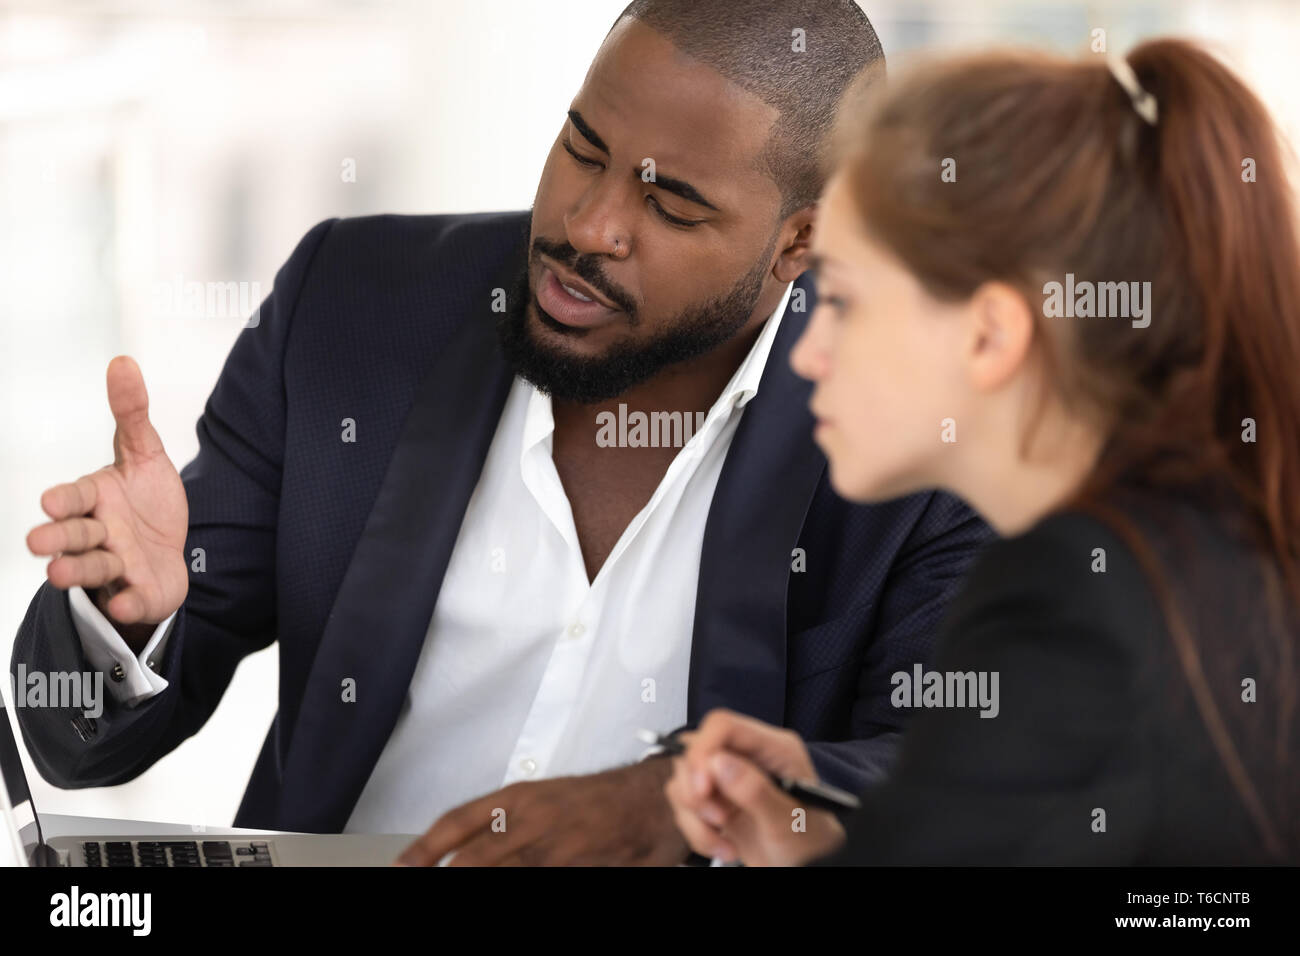 African american businessman mentor teaching caucasian intern with computer Stock Photo